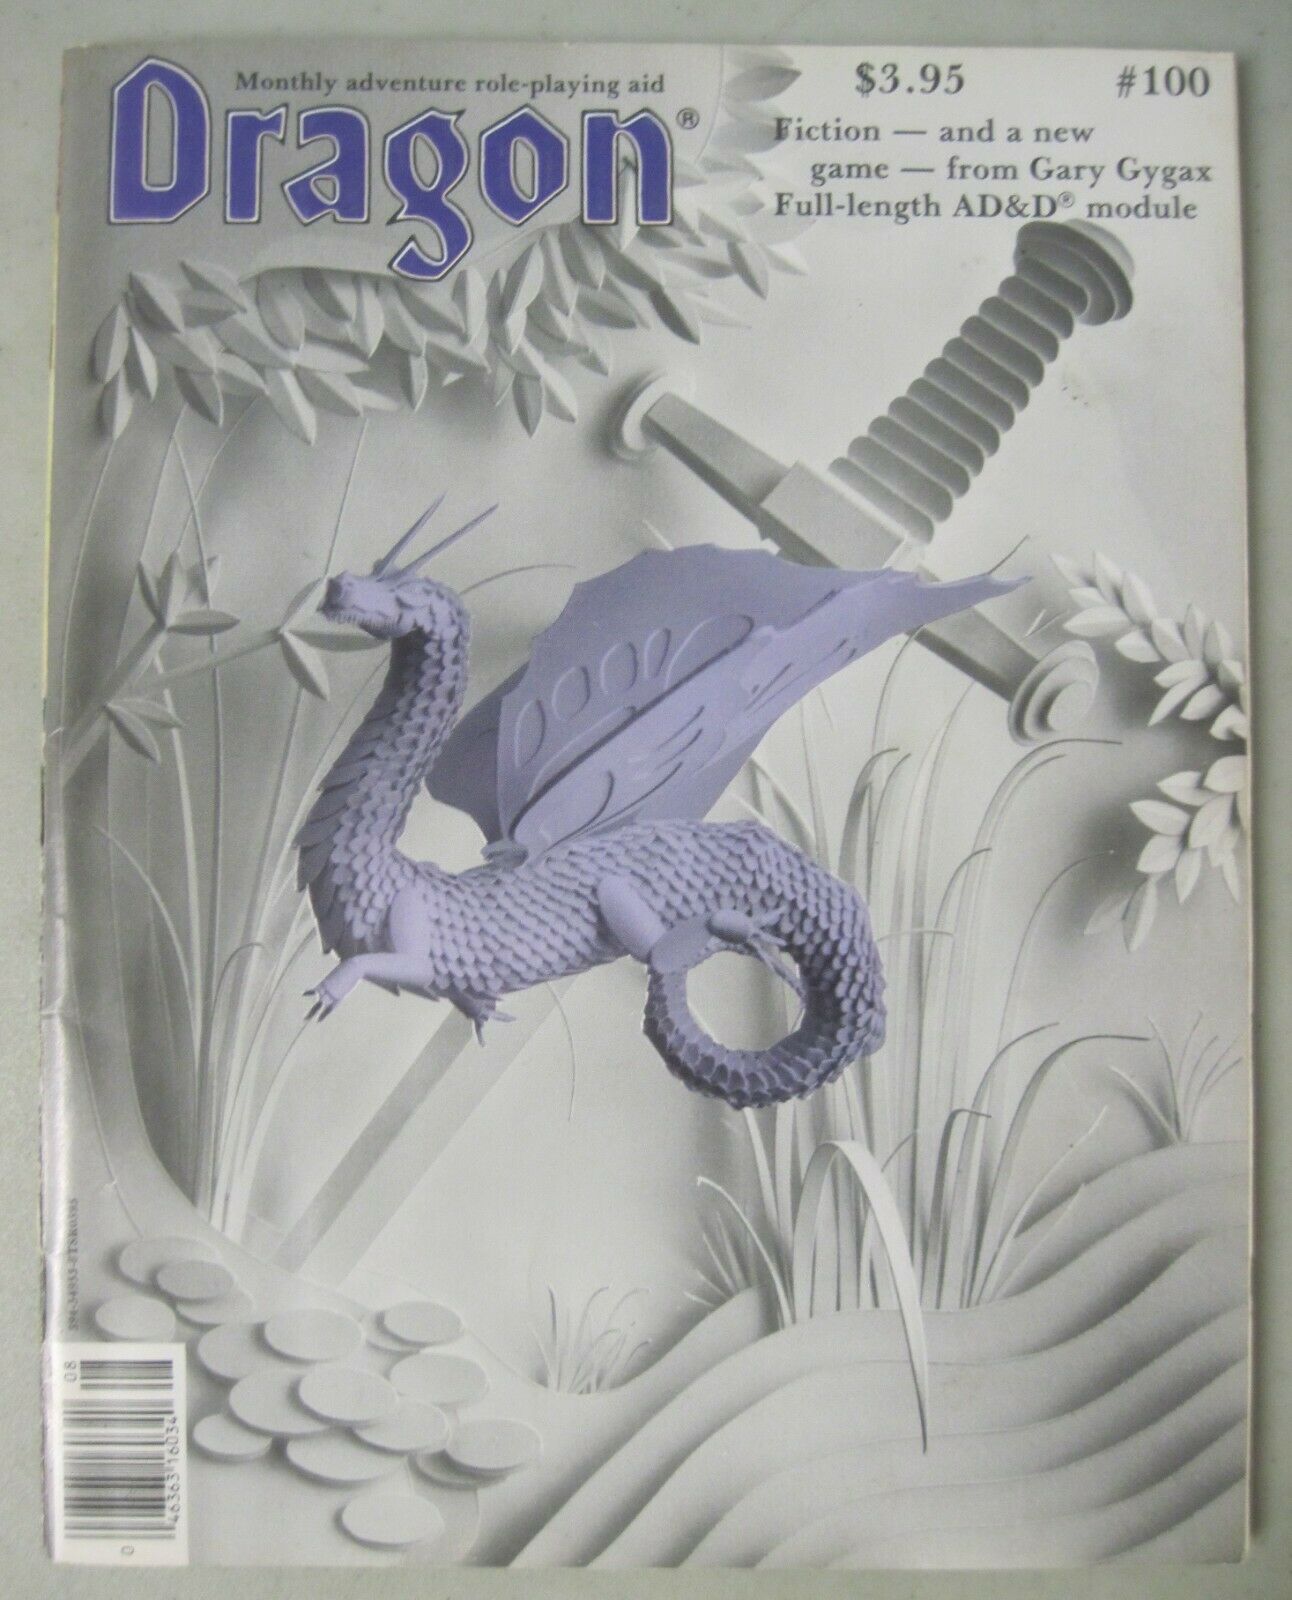 Dragon Monthly Adventure Role-playing Aid Magazine #100 August 1985 Gary Gygax